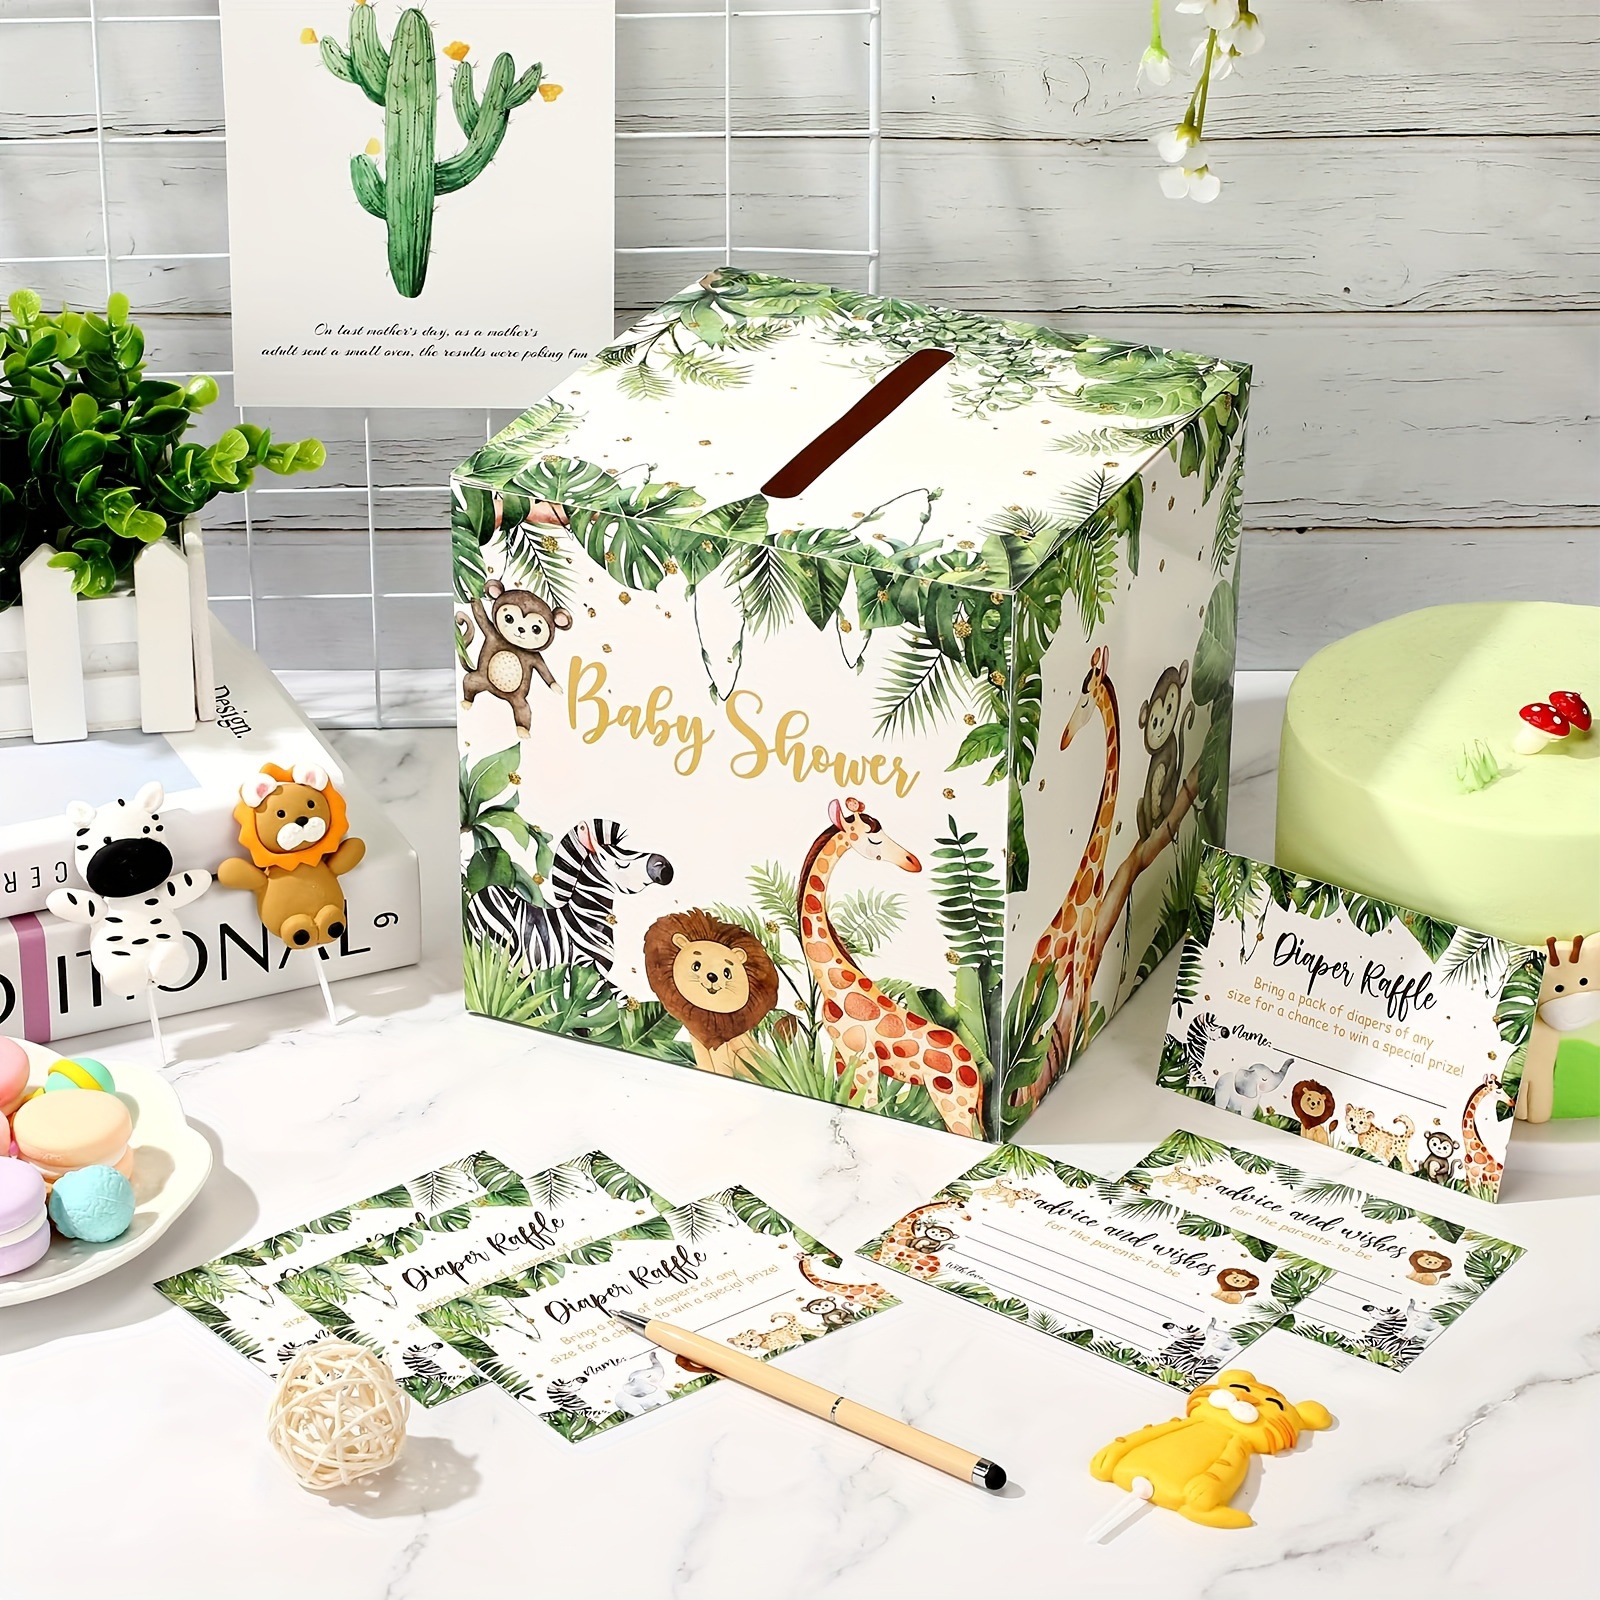 

51pcs Woodland Shower Card Box And Advice Cards, Diaper Raffle Game Box Tickets, Animals Safari Creatures Party Decorations For Baby Shower, Birthday, Gender Reveal (jungle Animal Theme)